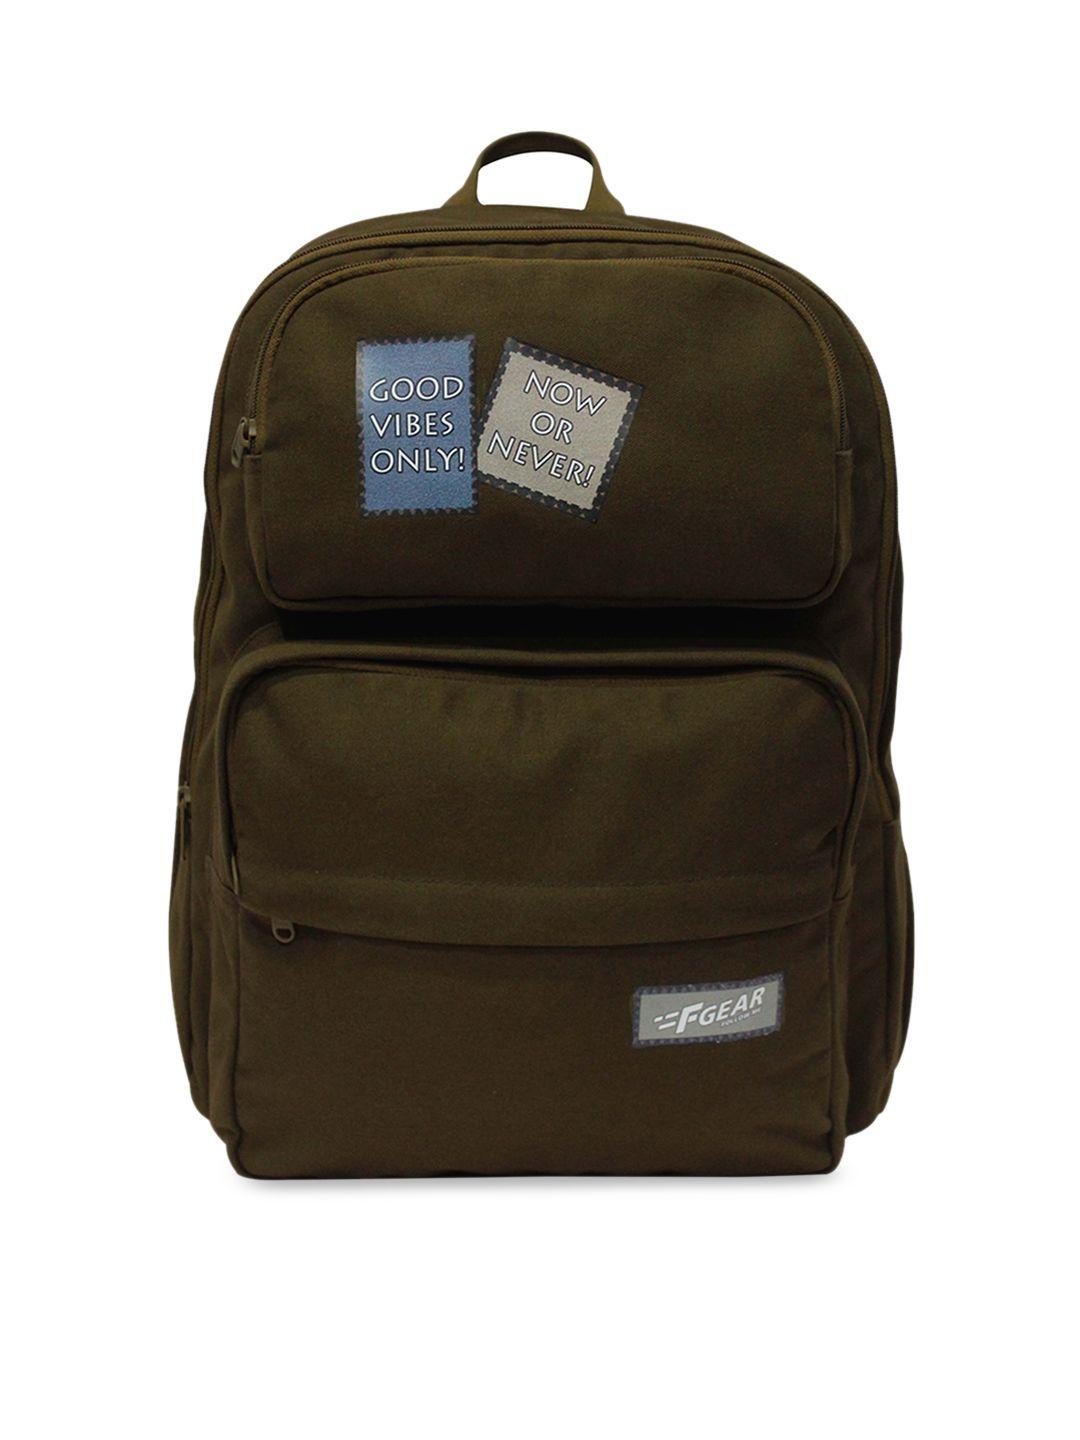 f gear unisex olive green solid backpack